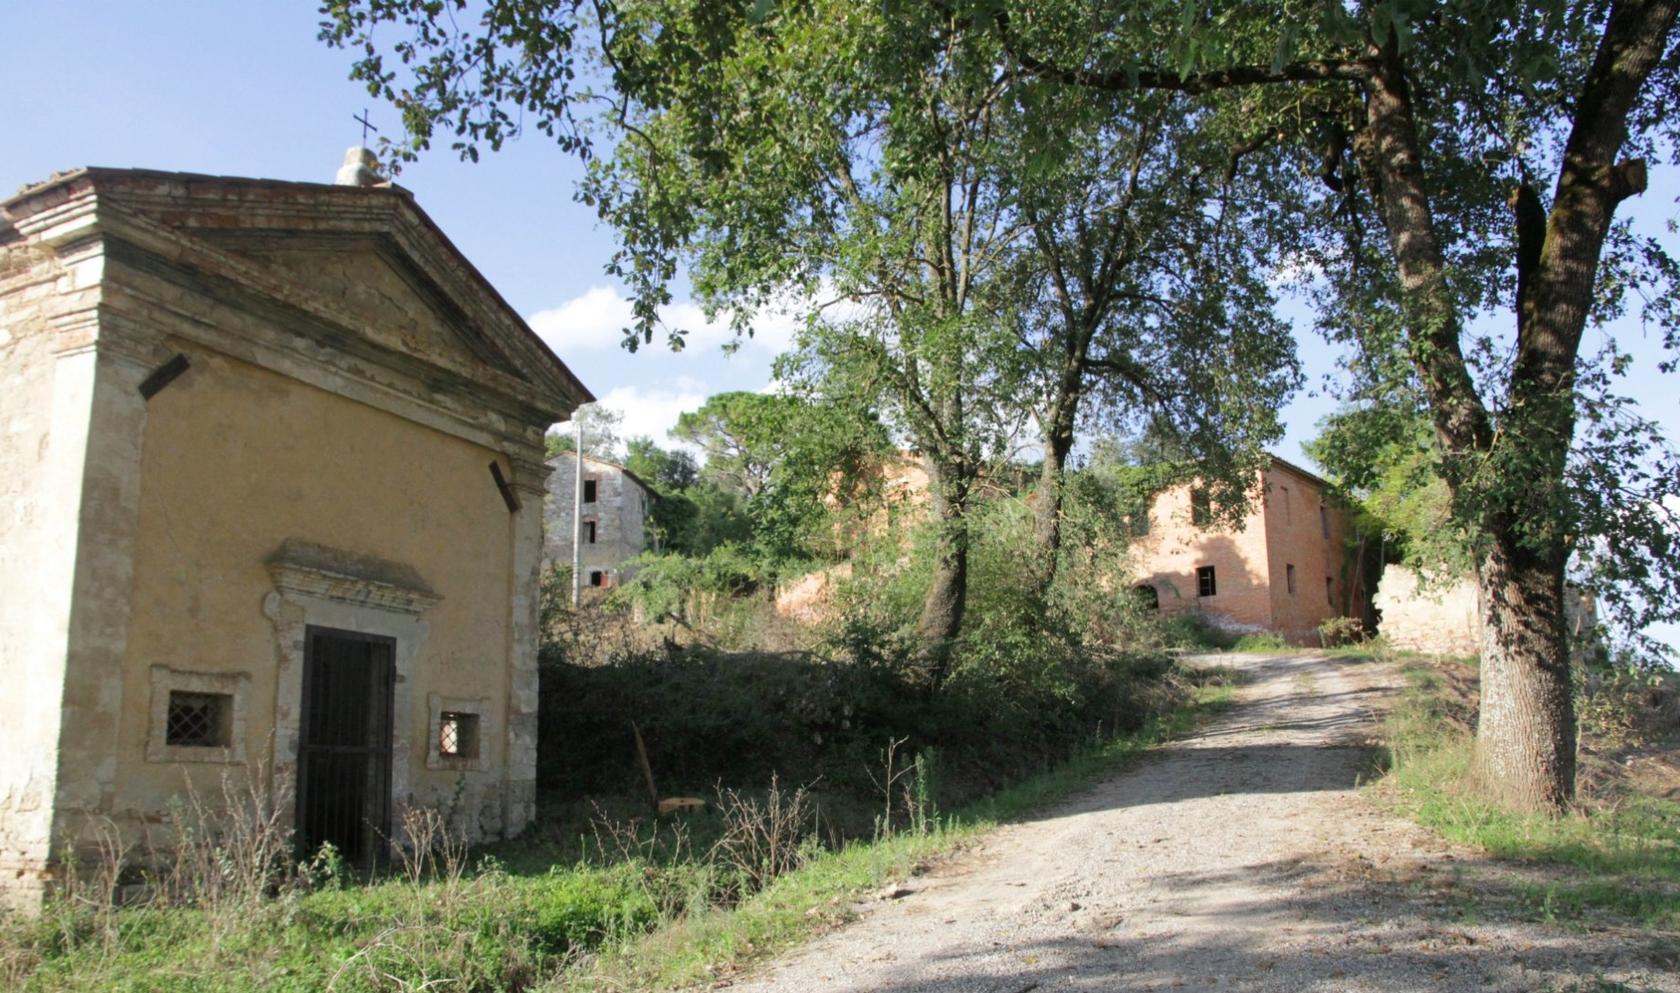 Toscana Immobiliare - The property consists of five houses, 3 outbuildings and a small church